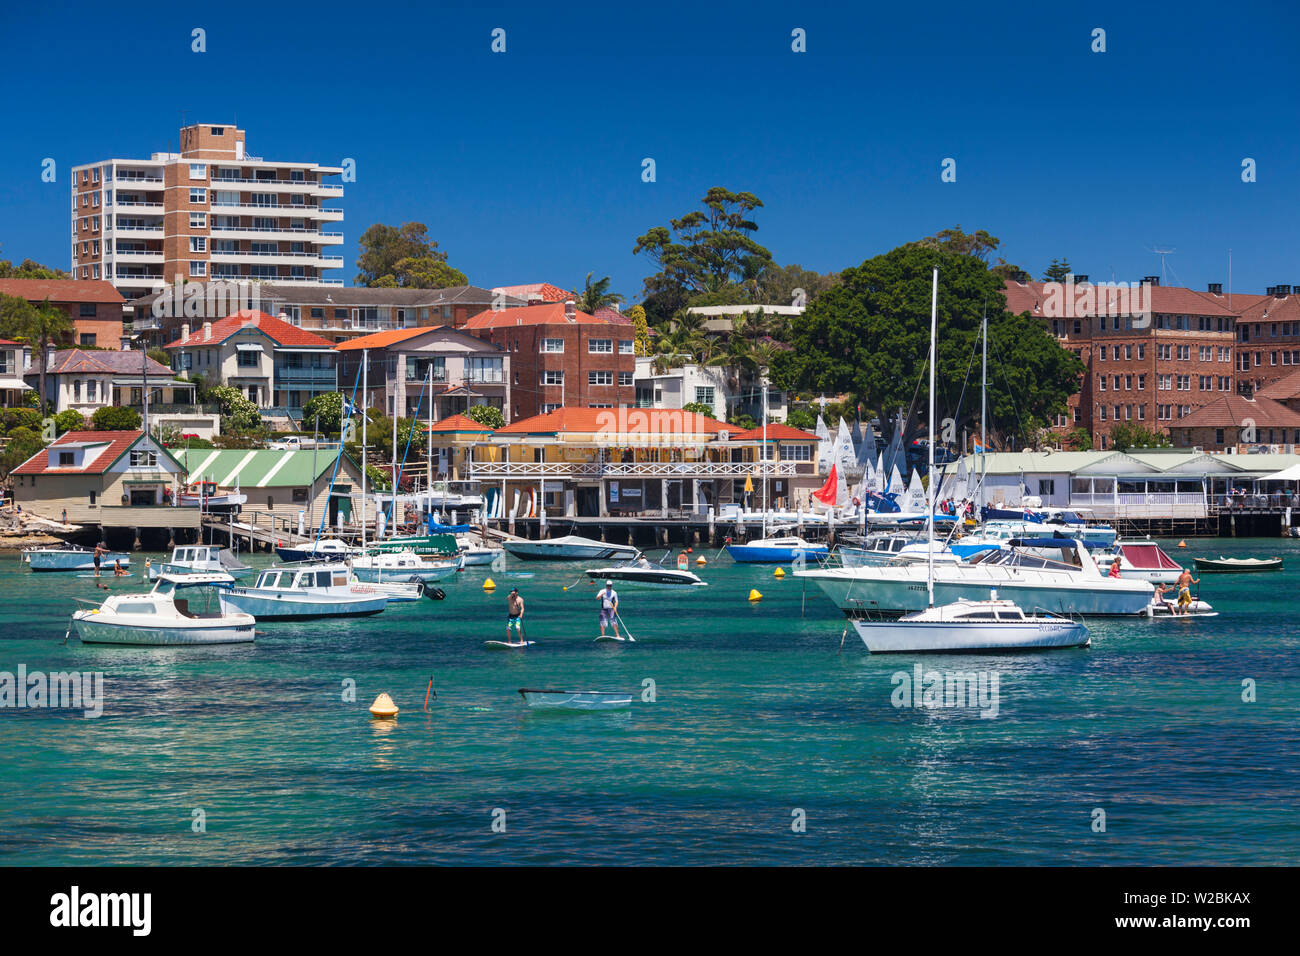 L'Australie, New South Wales, NSW, Sydney, Manly, Manly Cove Banque D'Images